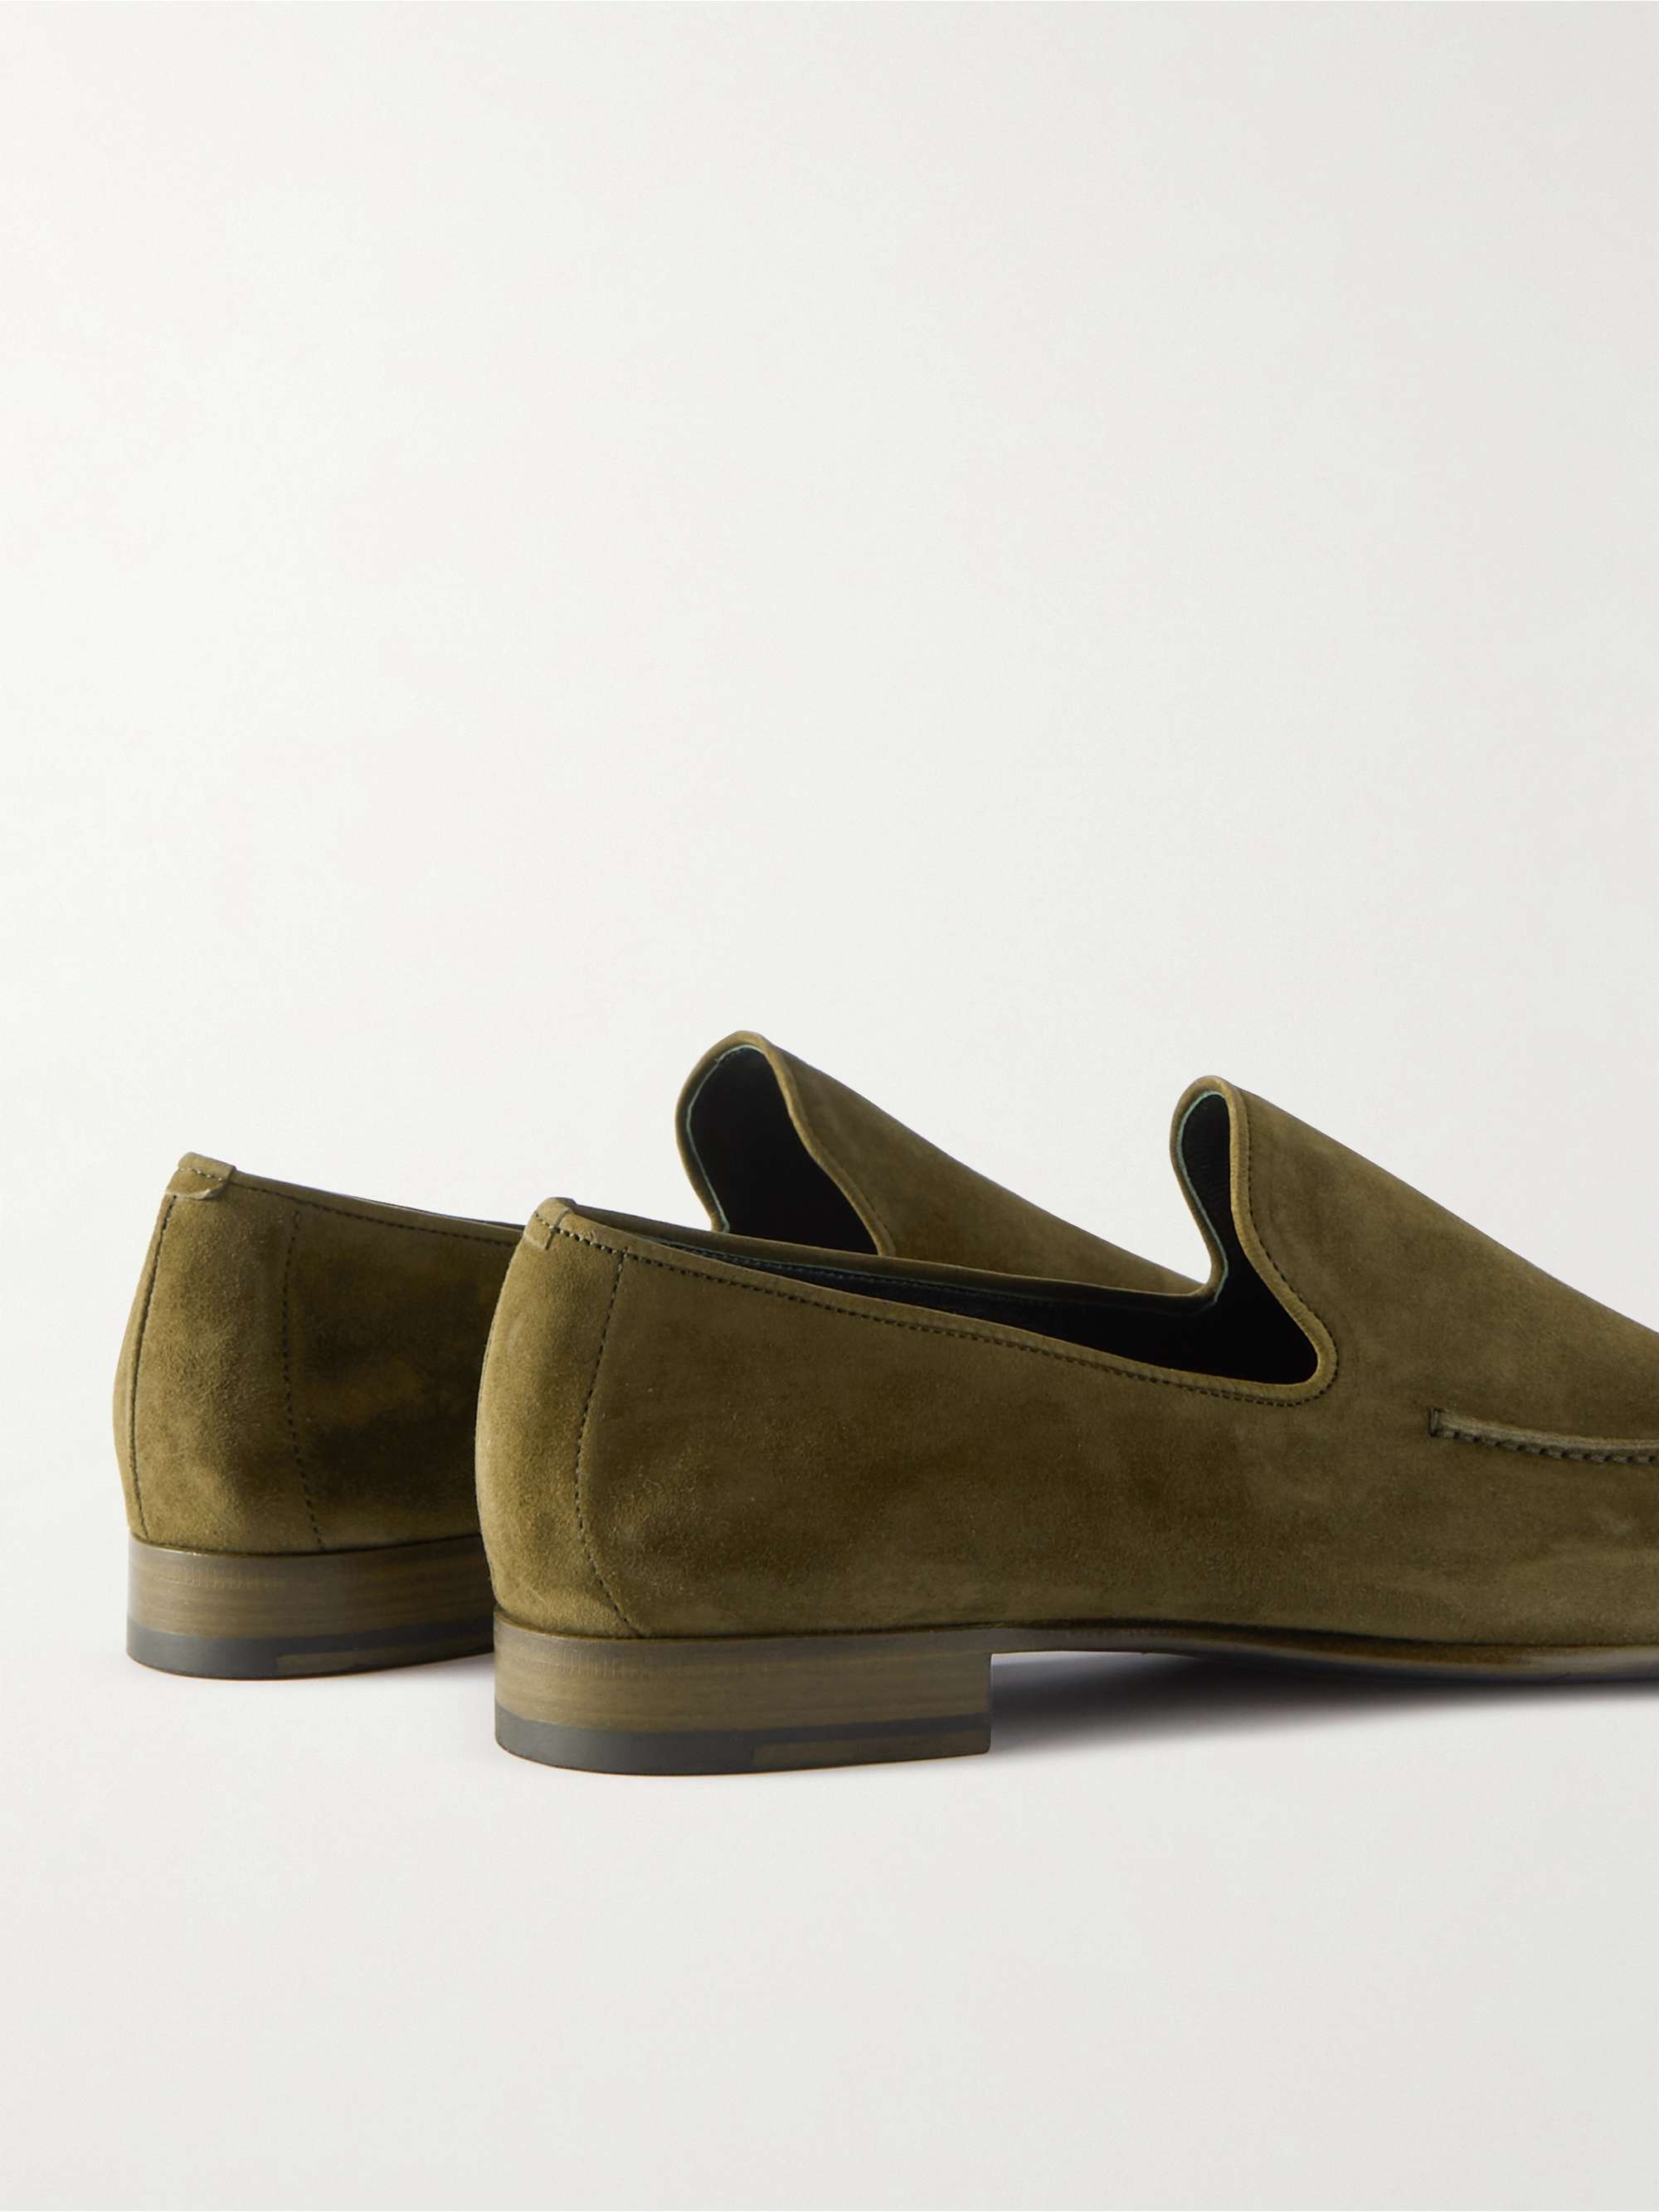 BRIONI Suede Loafers